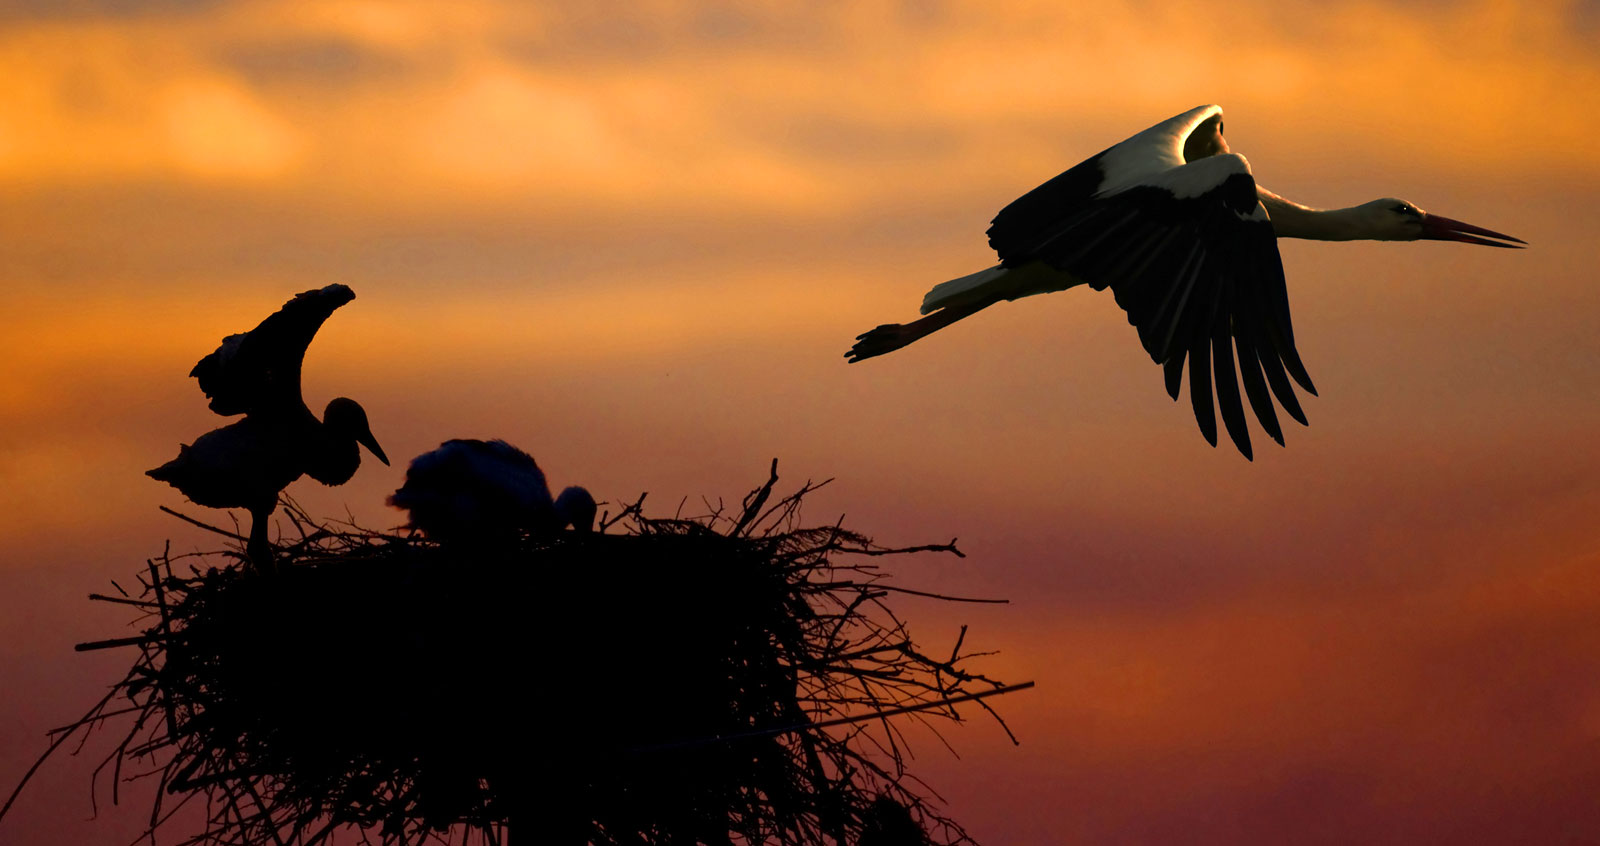 Symbolic Meaning of the Stork